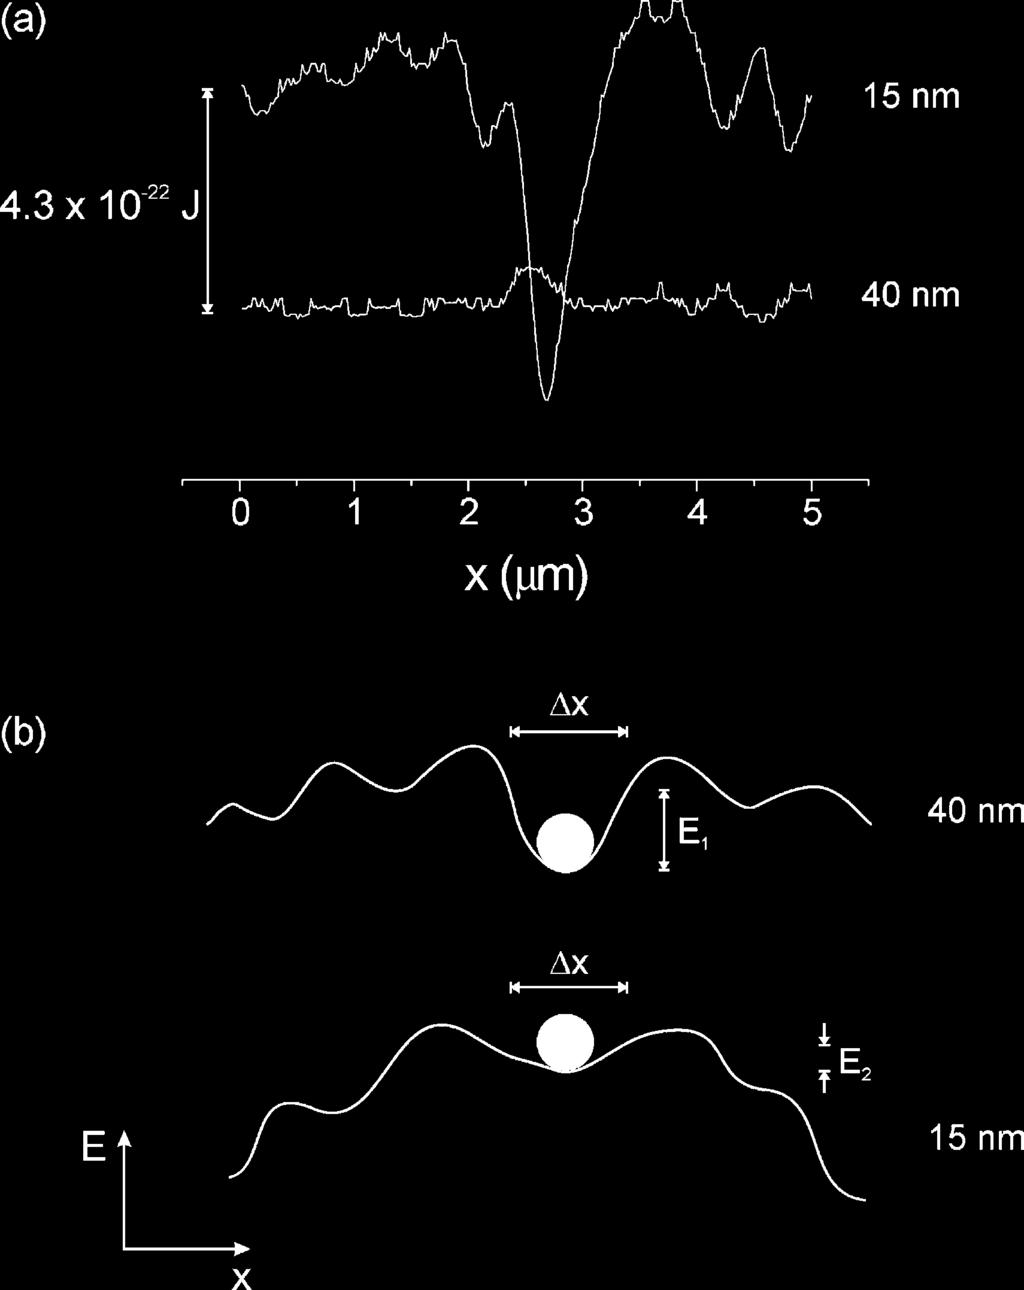 nm; (c) resonance frequency shift; (d) corresponding dissipation signal at a constant scan height of 15 nm. Lines in (b) and (d) illustrate the position of cross-sections shown in Fig. 5.